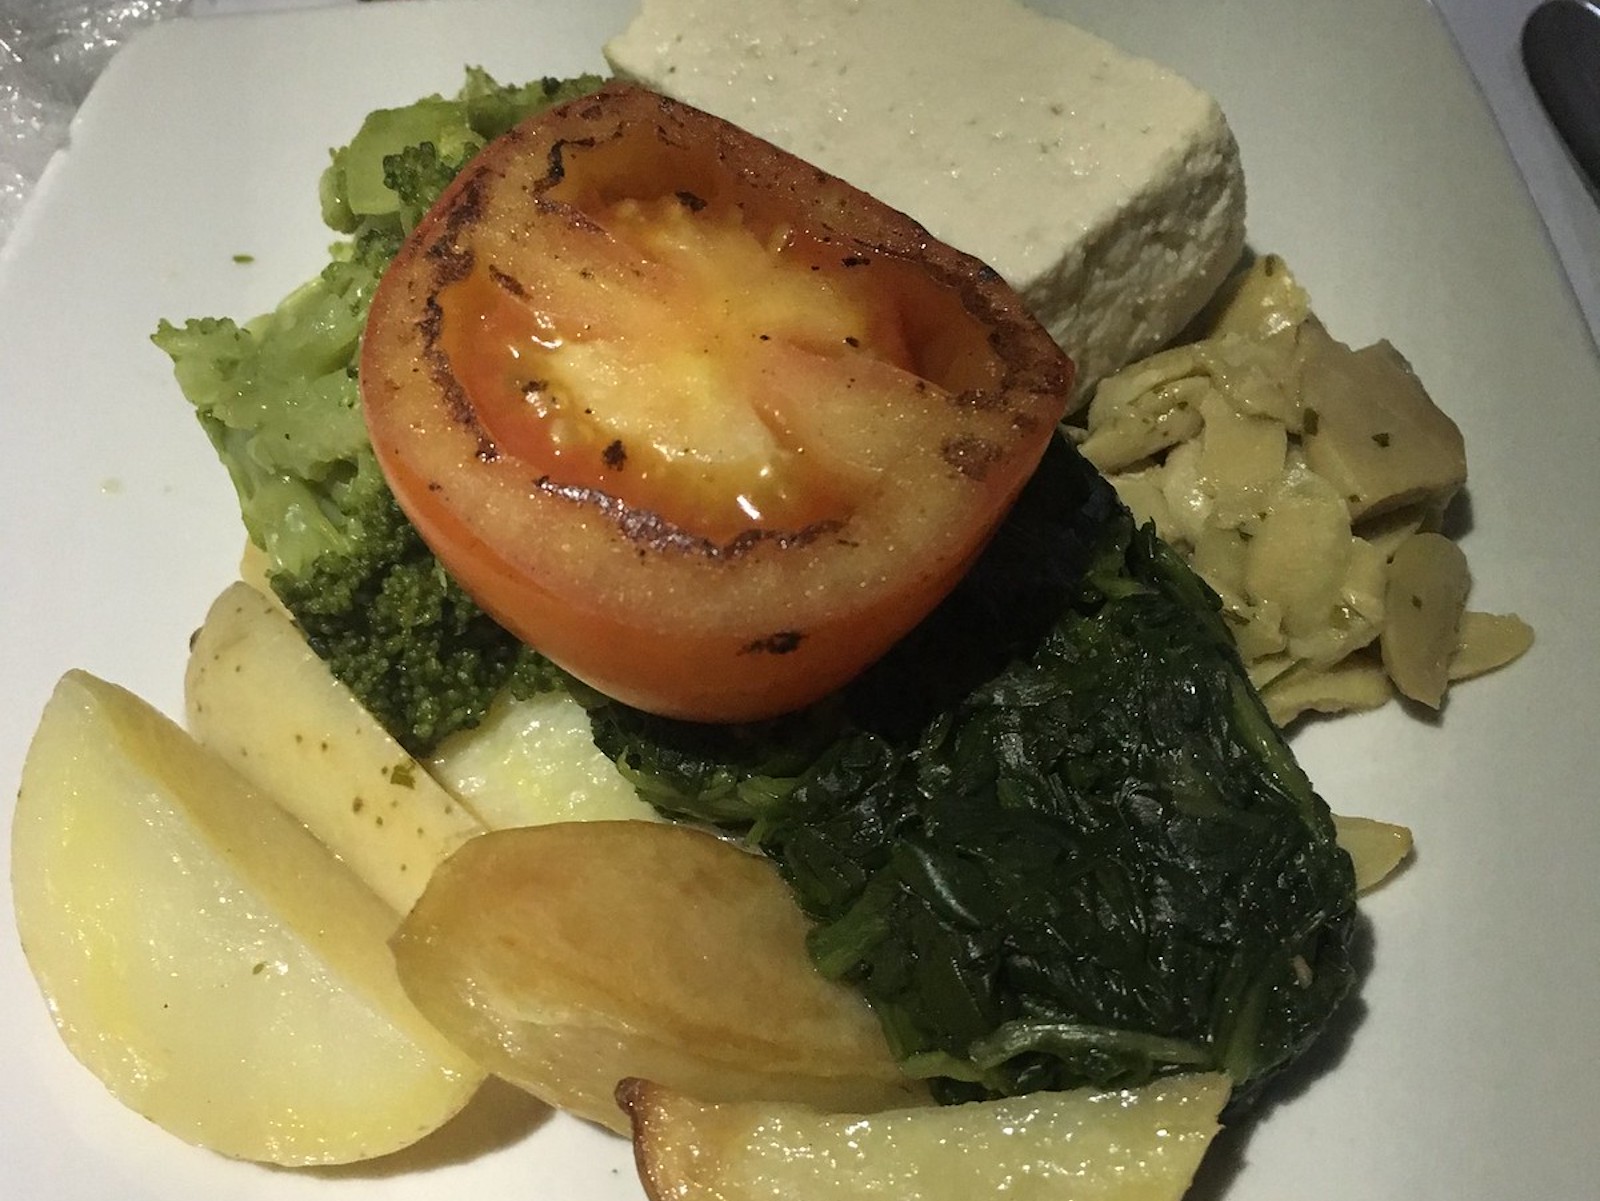 South African Airways vegan breakfast in business class is a flop